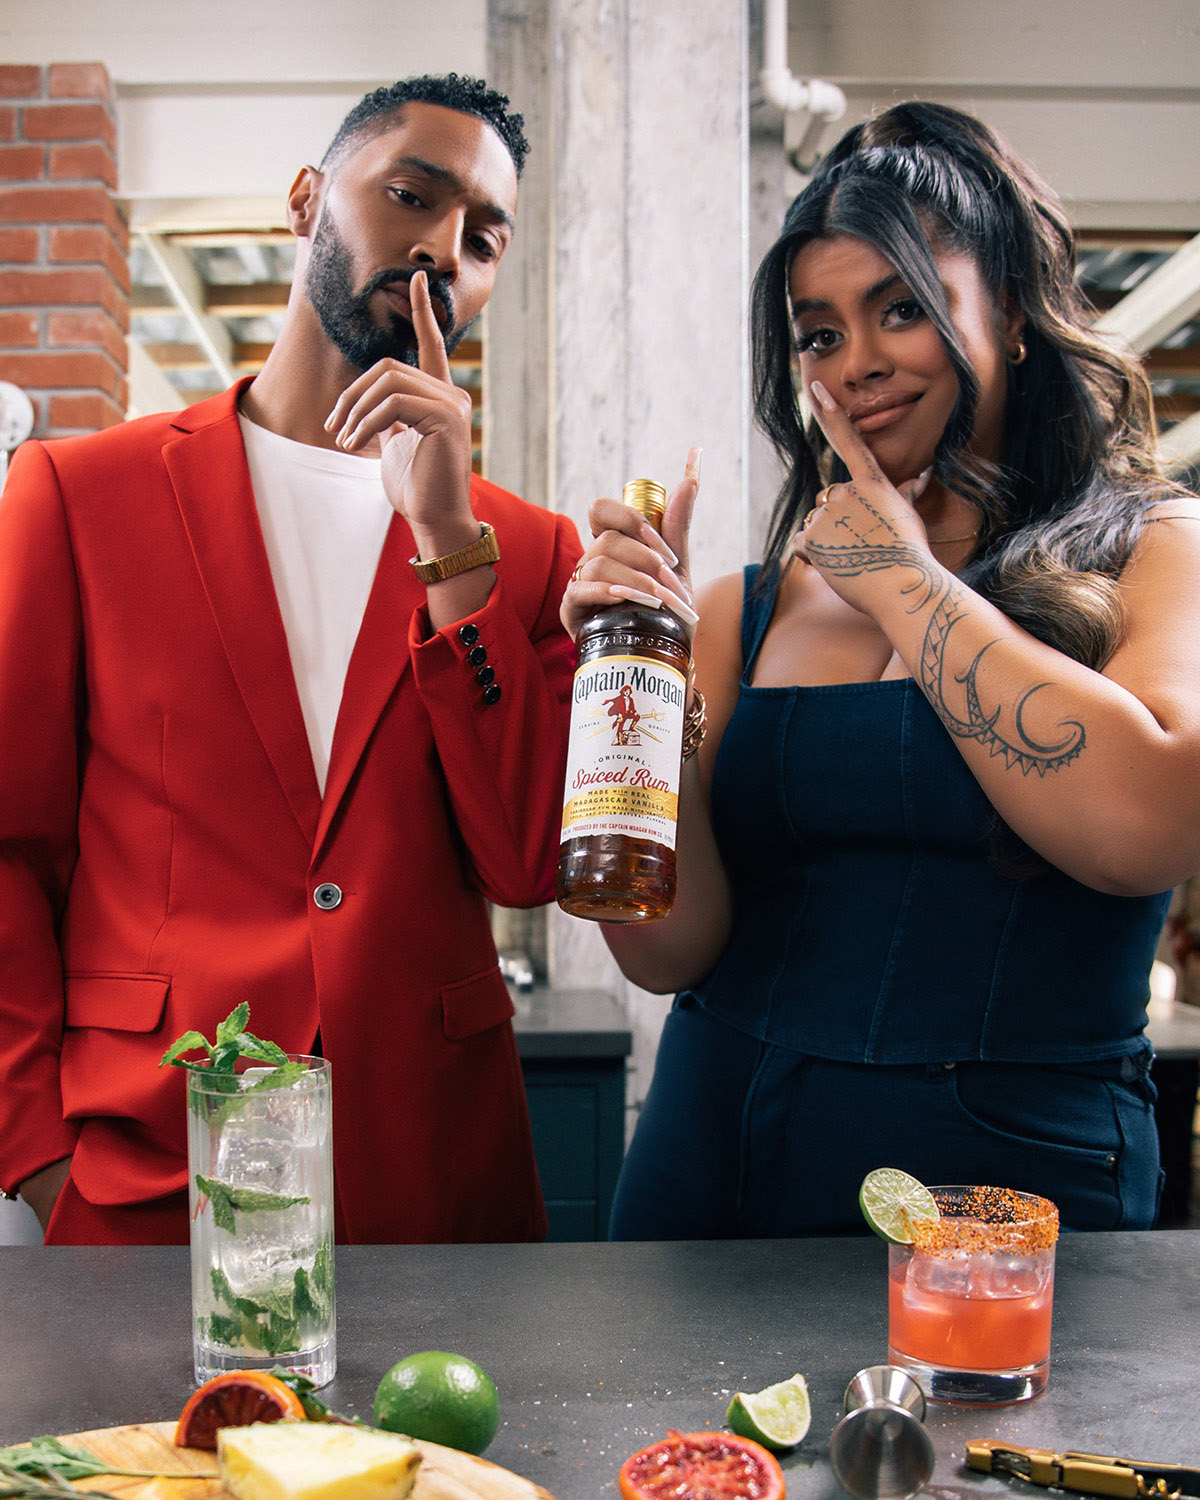 Comedian, Actor and Host, Tone Bell and Influencer, Host, Author, Drew Afualo will star in a series of social spots highlighting Captain Morgan Original Spiced Rum and the Battle of the Badtenders.